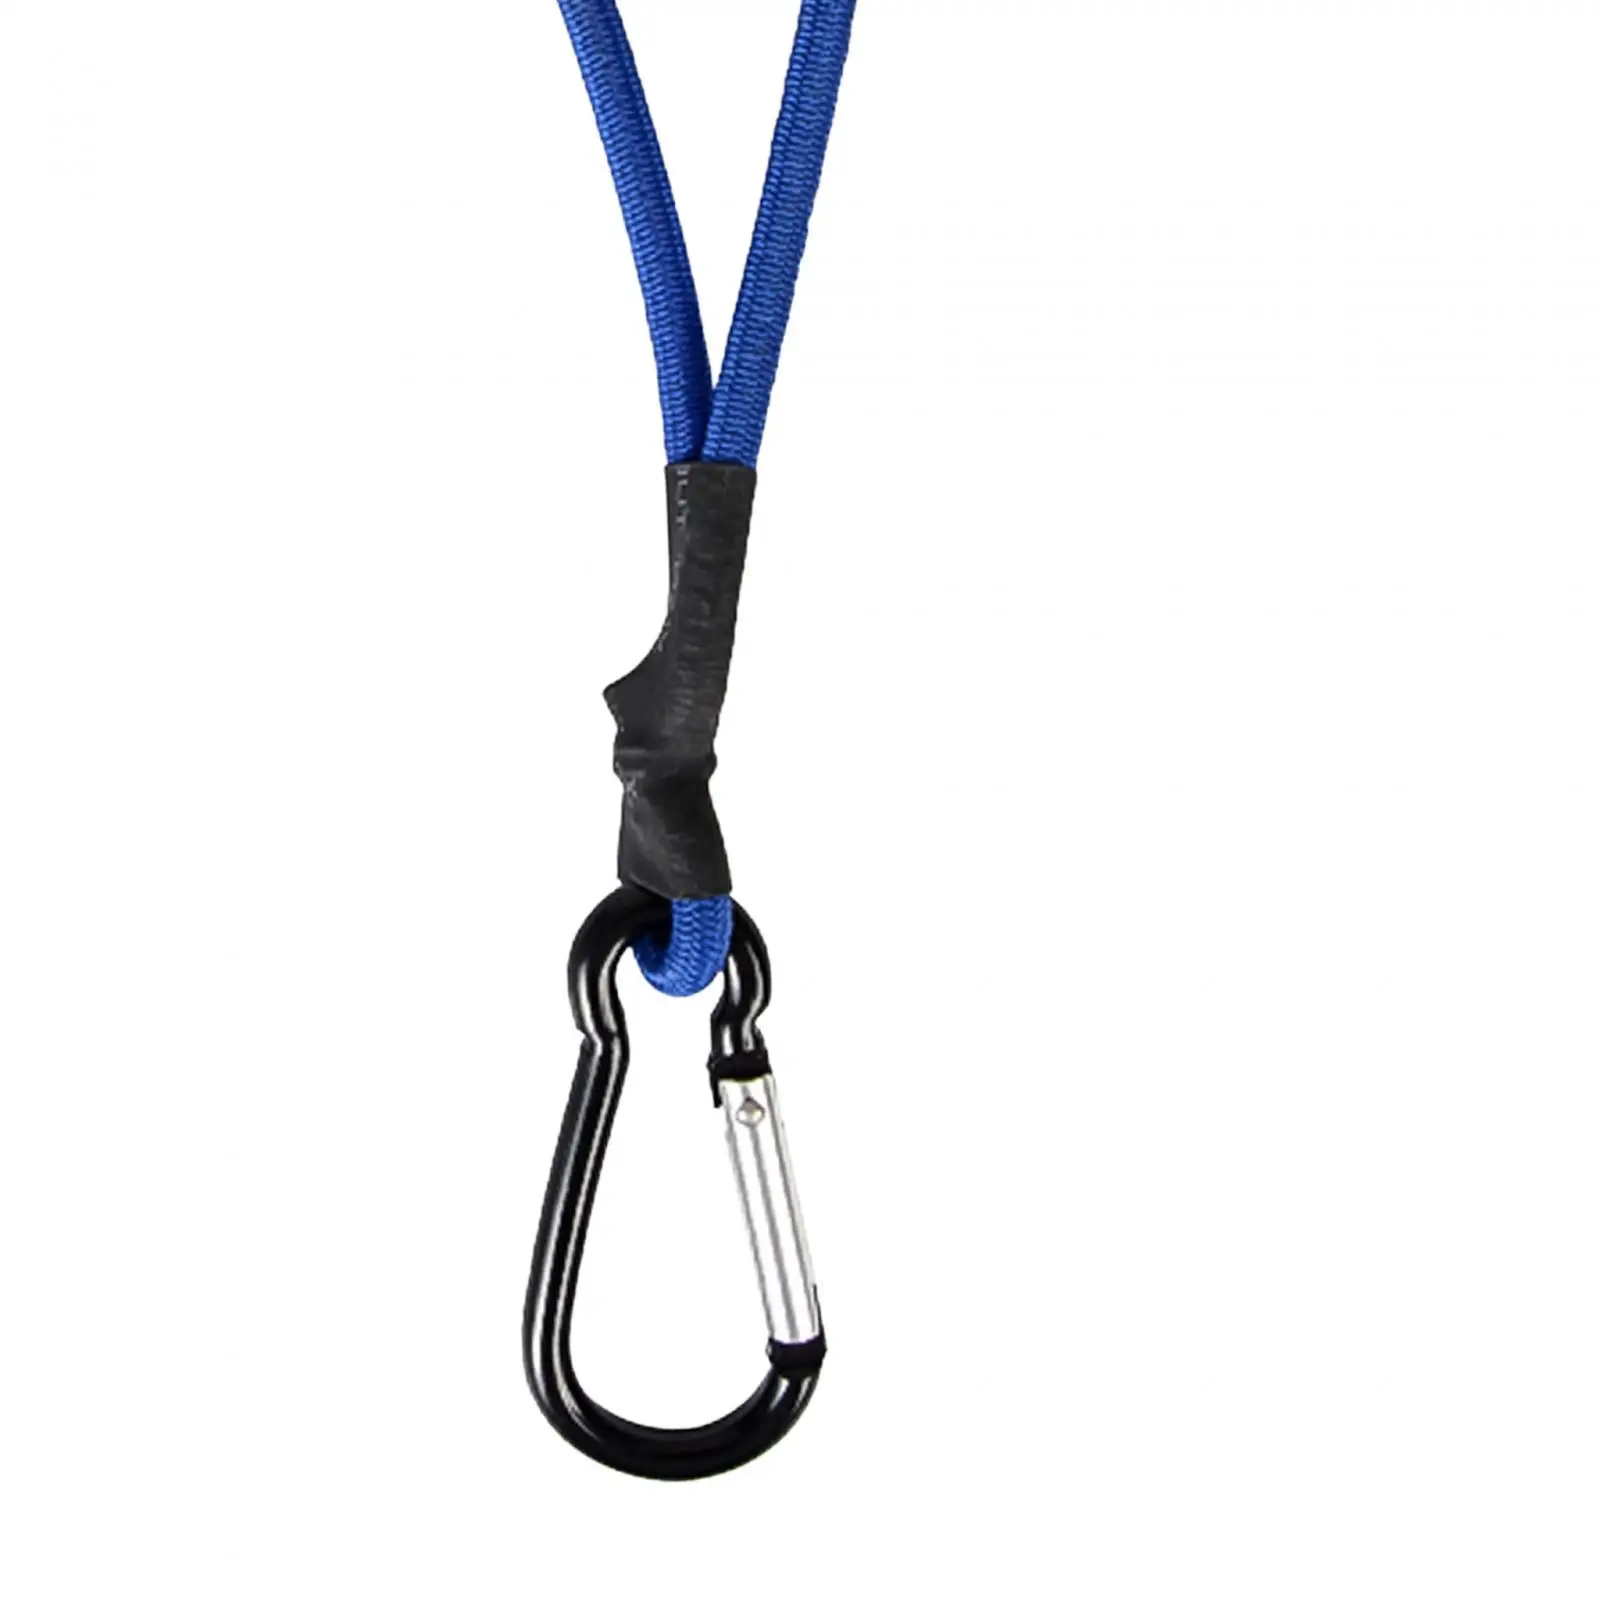 5 Bungee Cord with Carabiner Hook Bungee Strap for Tarpaulin